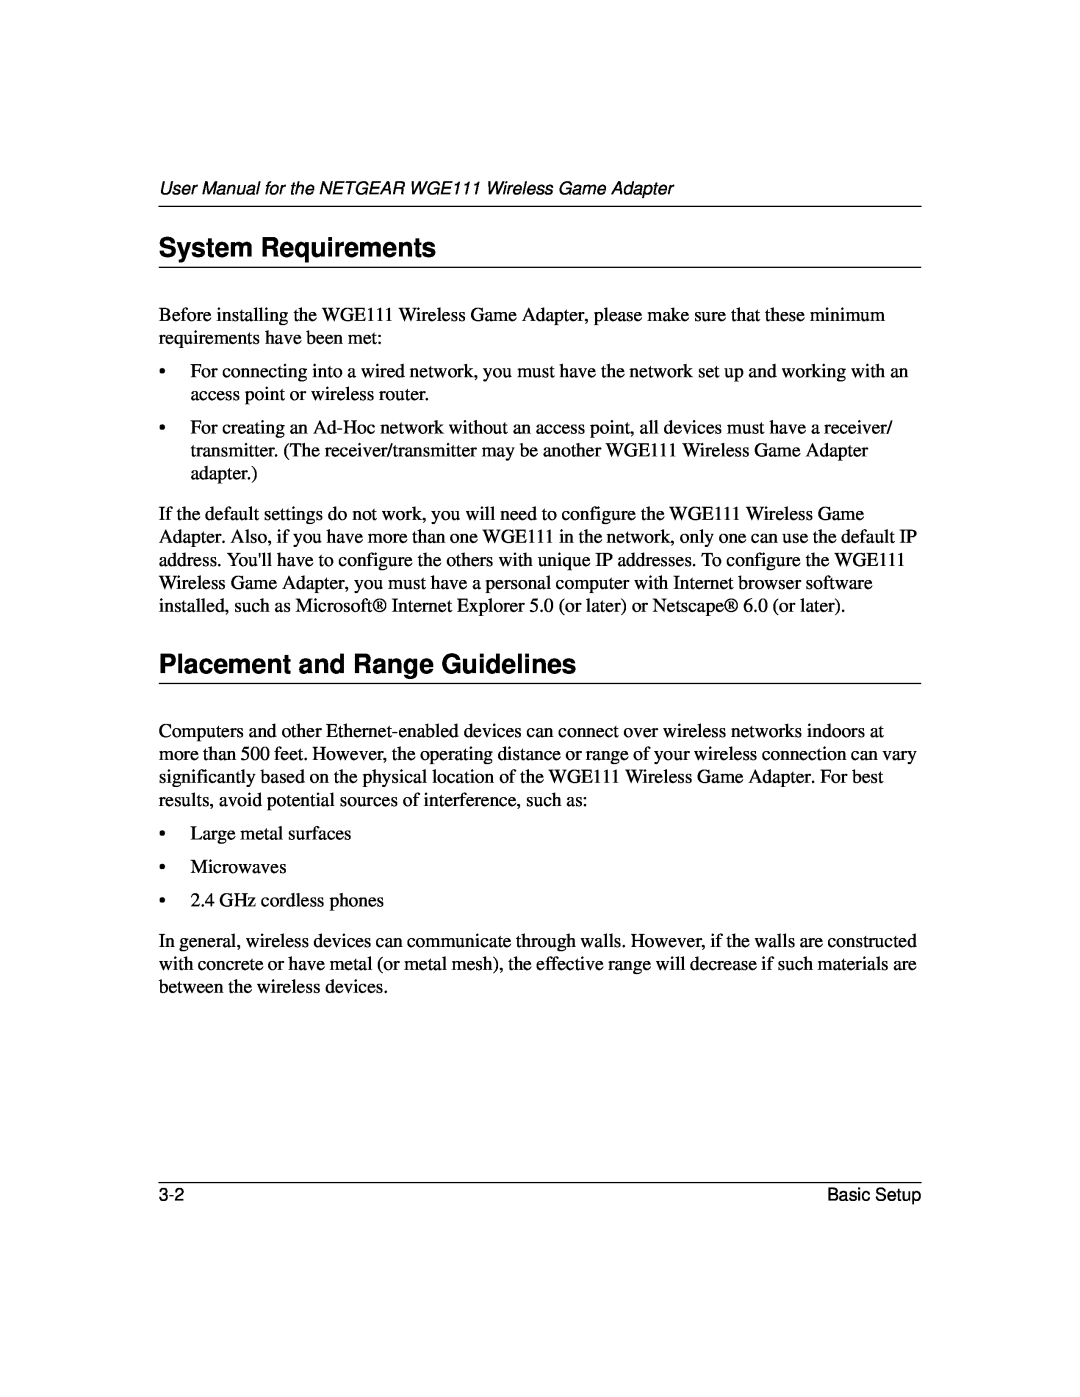 NETGEAR WGE111 user manual System Requirements, Placement and Range Guidelines 